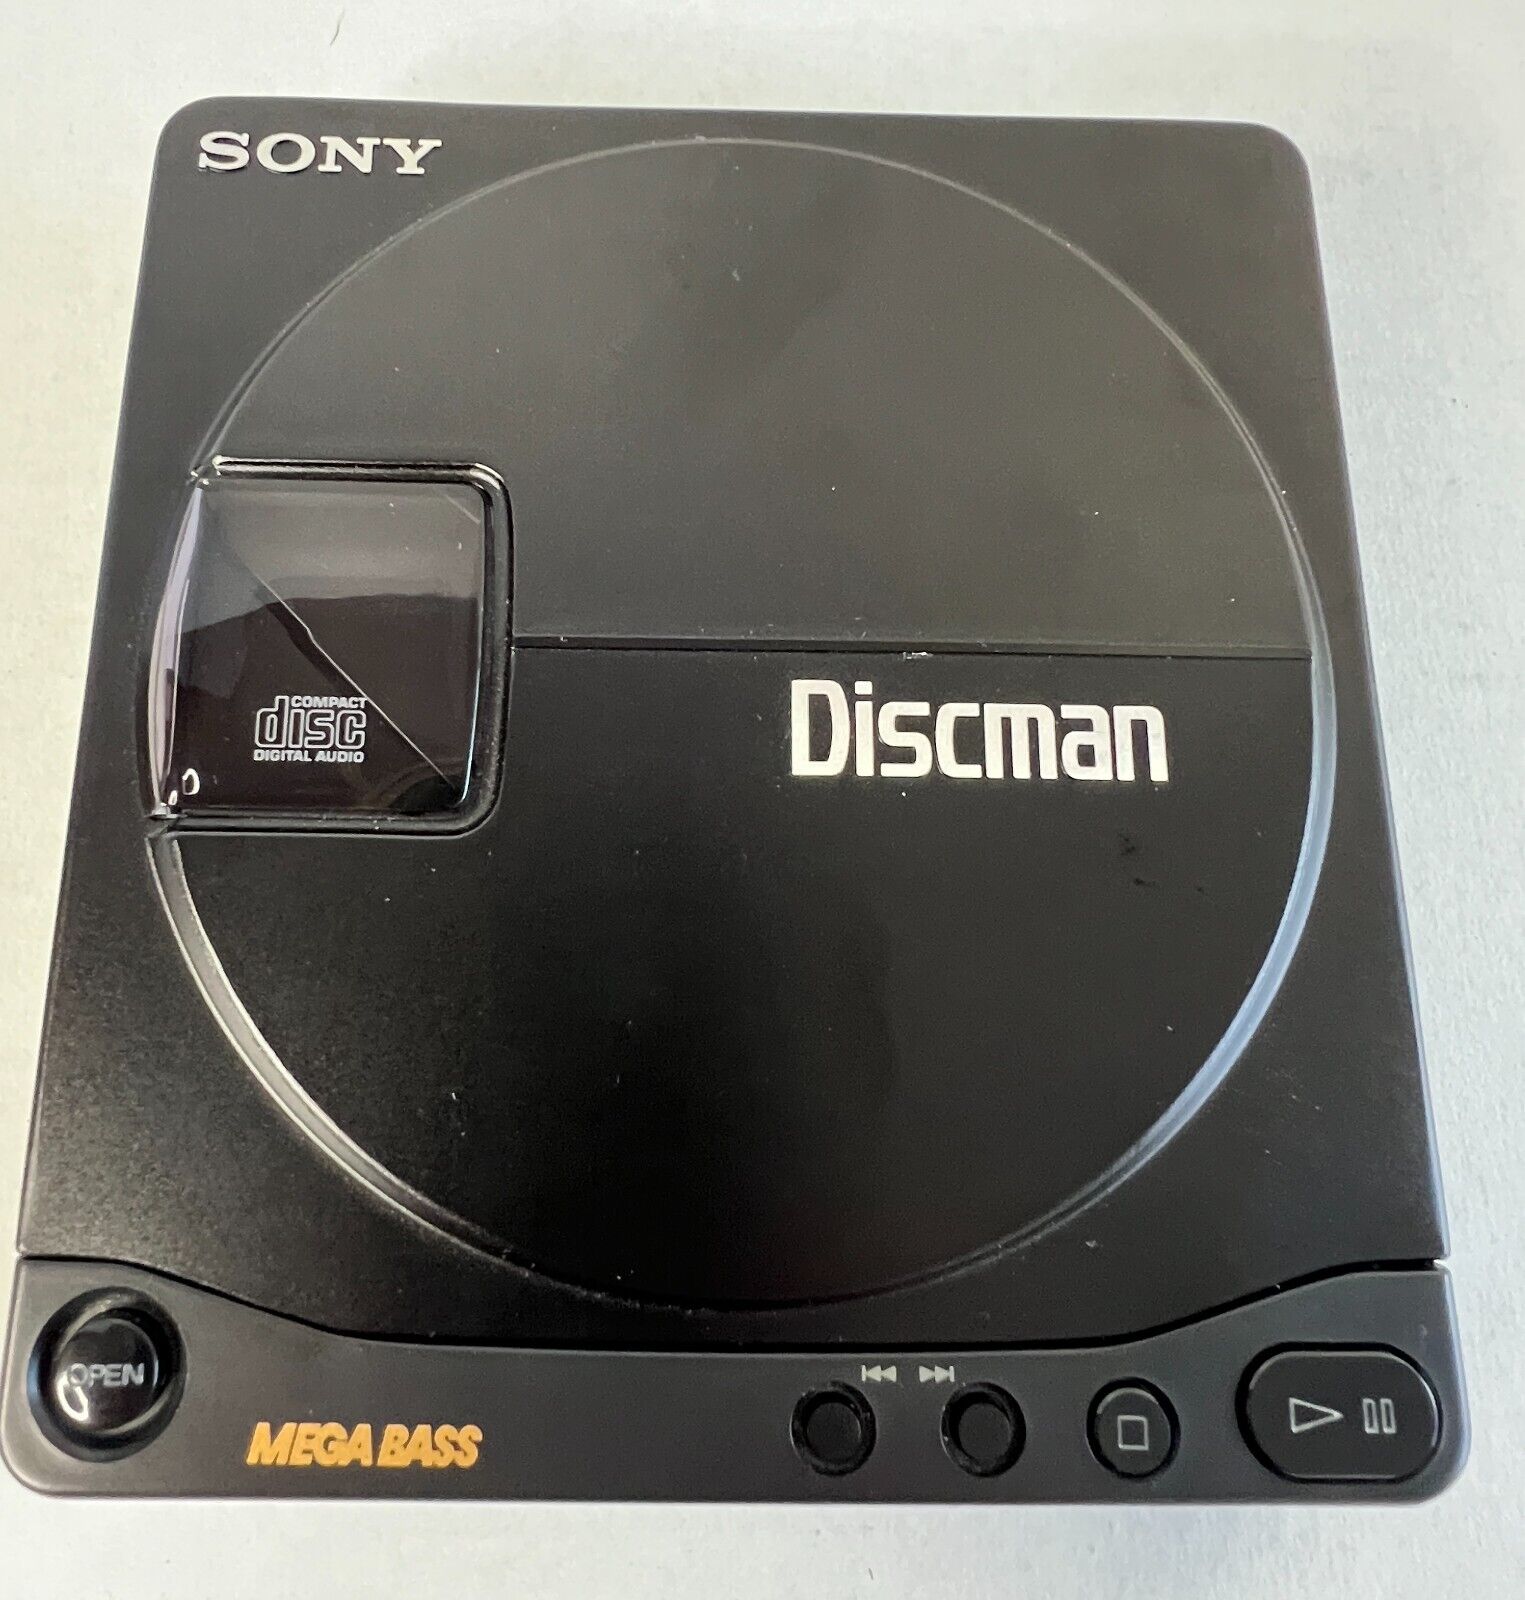 Sony D-9 Discman Mega Bass Vintage CD Compact Disc Player. Tested Works.no Chord